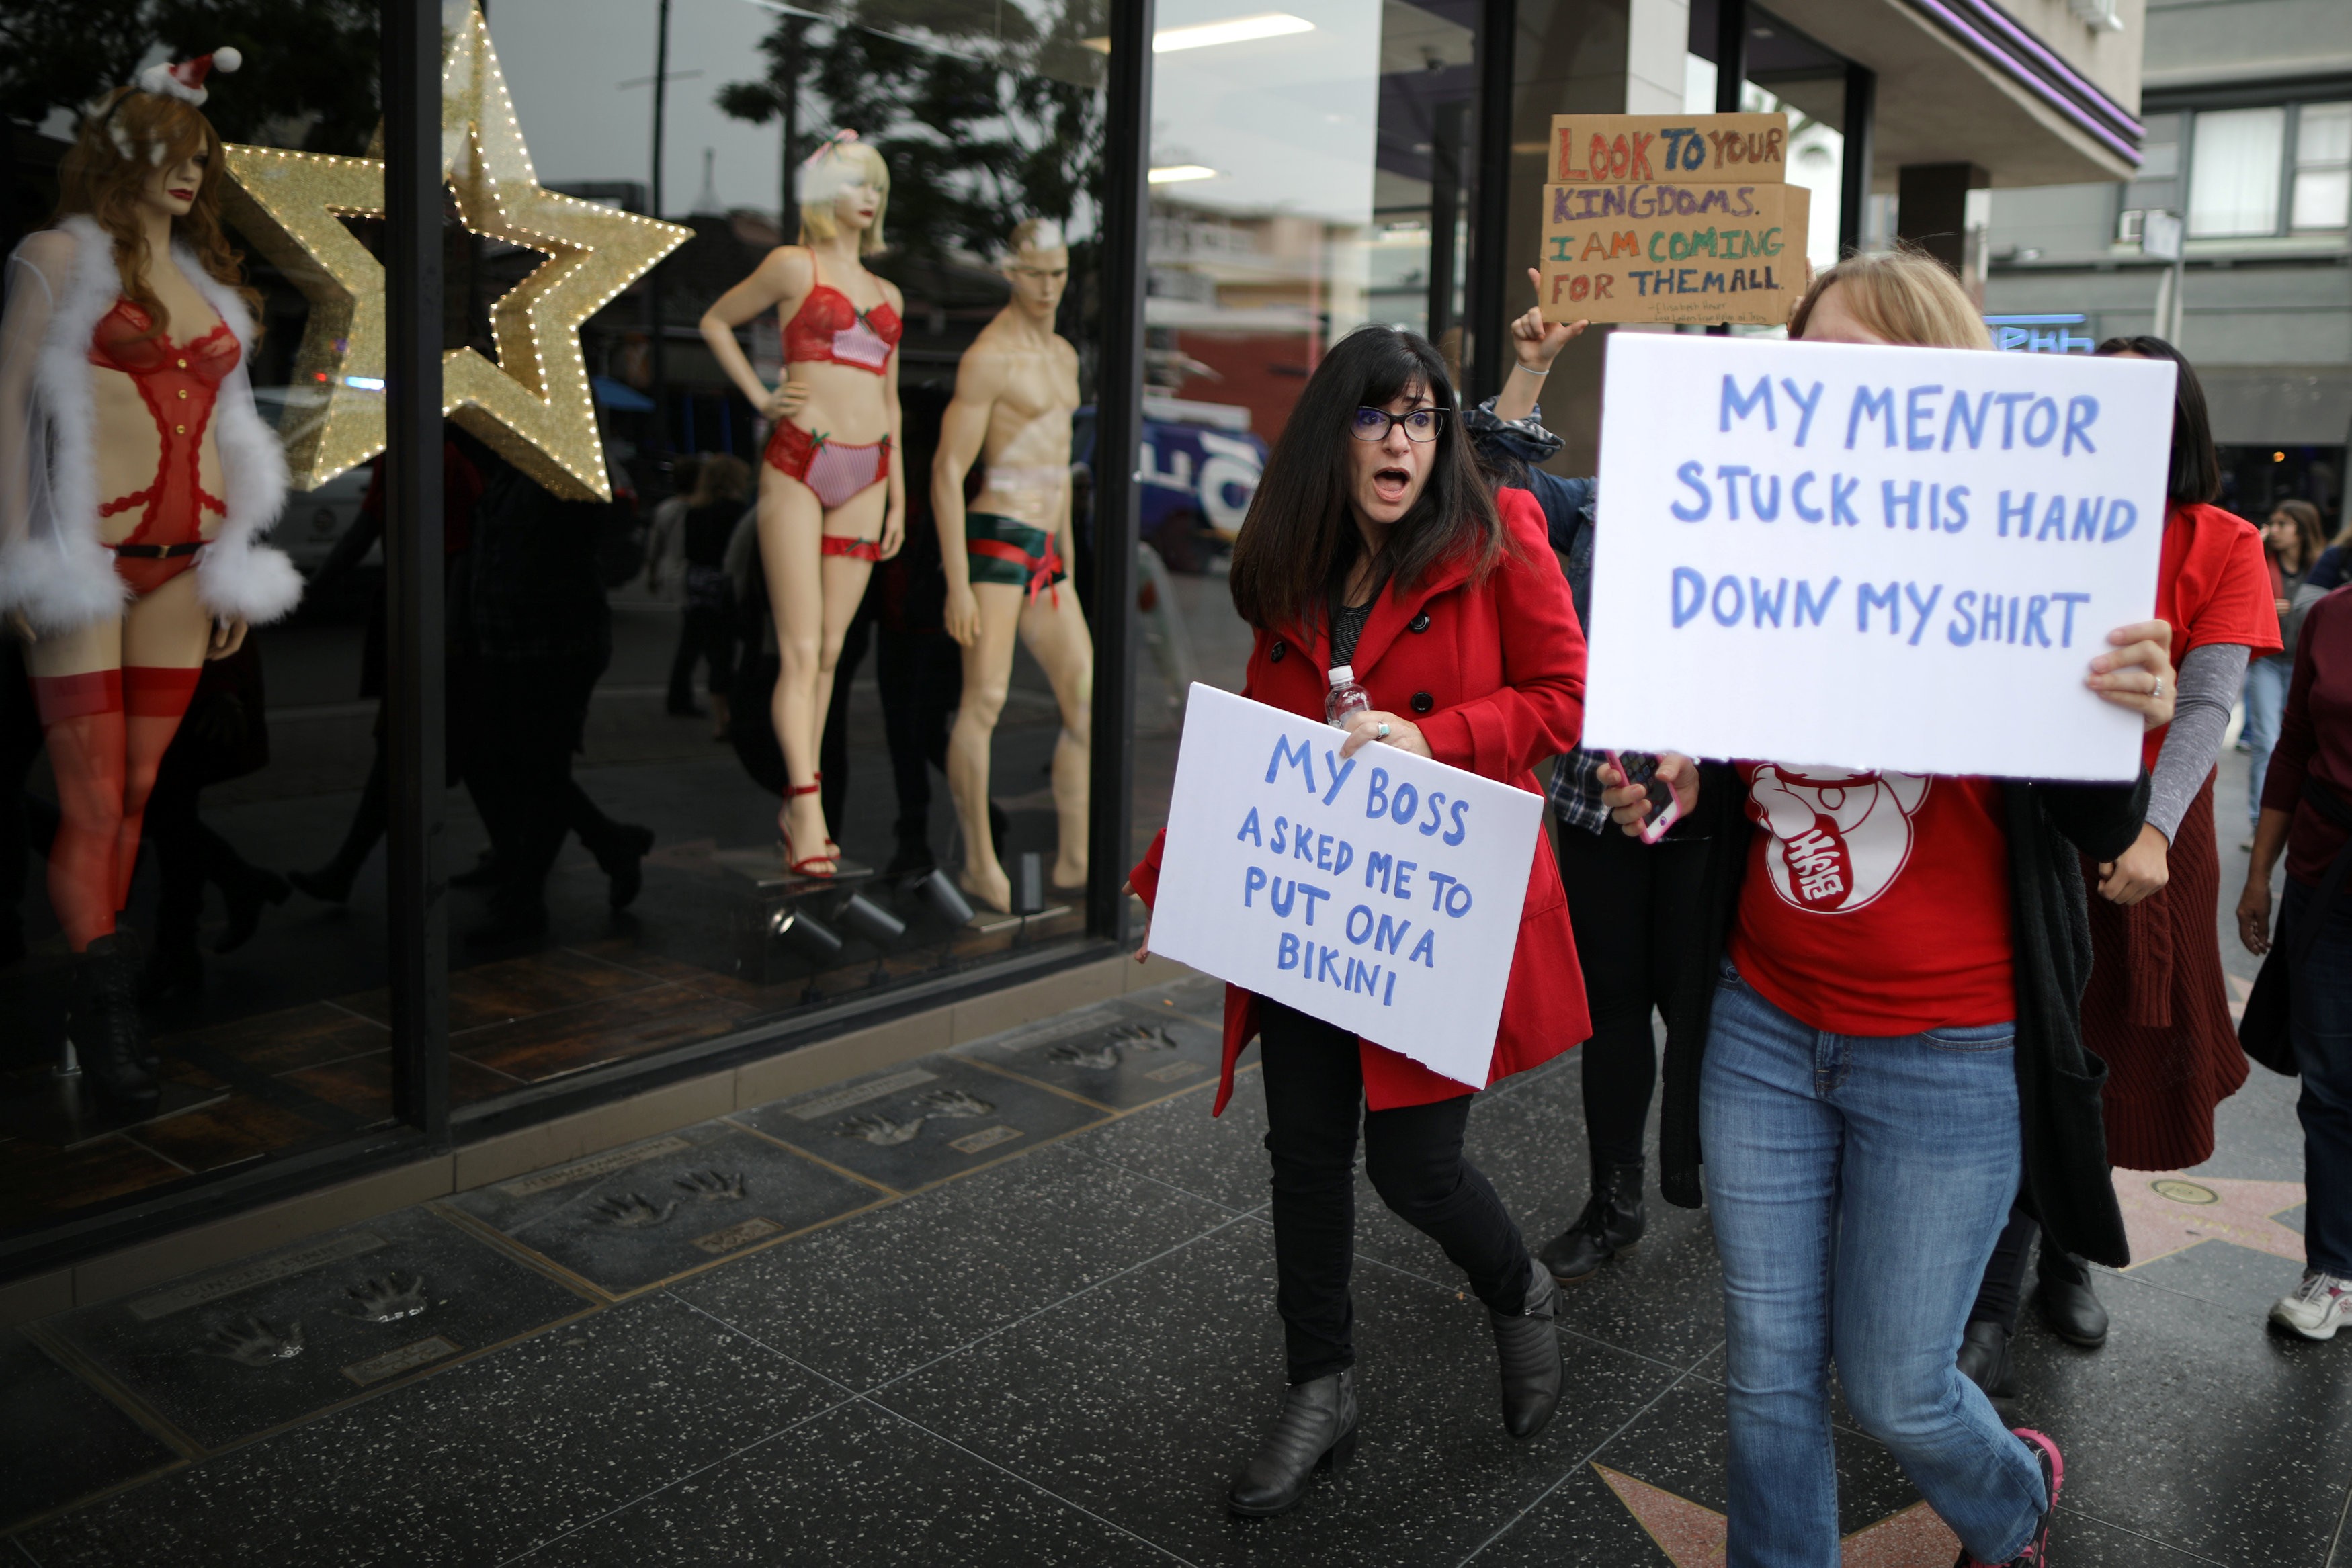 Women participate in a march for survivors of sexual assault in Hollywood last November. The #MeToo movement, sparked by allegations of sexual assault against powerful players in the film industry, has grown into a global social media campaign against sexual harassment. Photo: Reuters